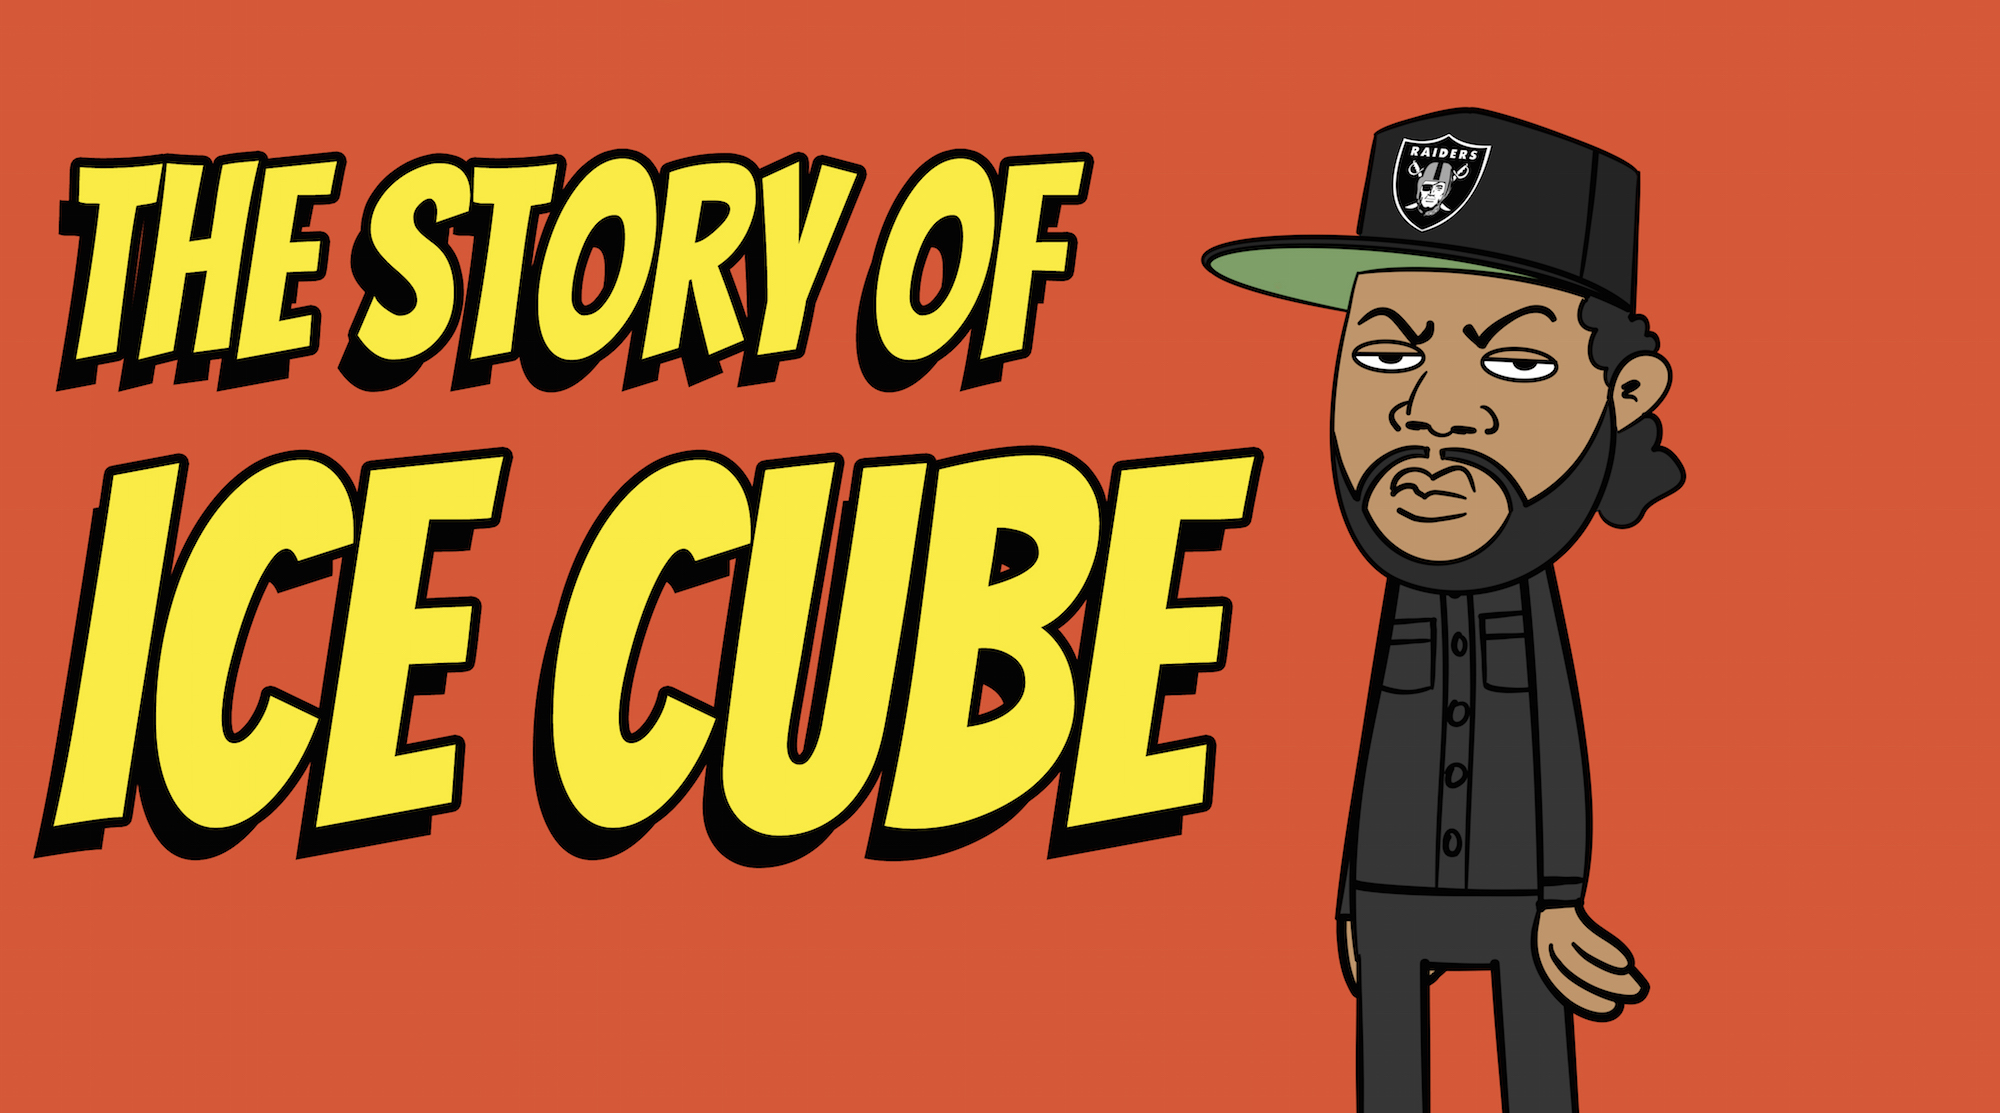 https://www.indiehiphop.net/wp-content/uploads/2020/10/Story-of-ICe-Cube.jpg